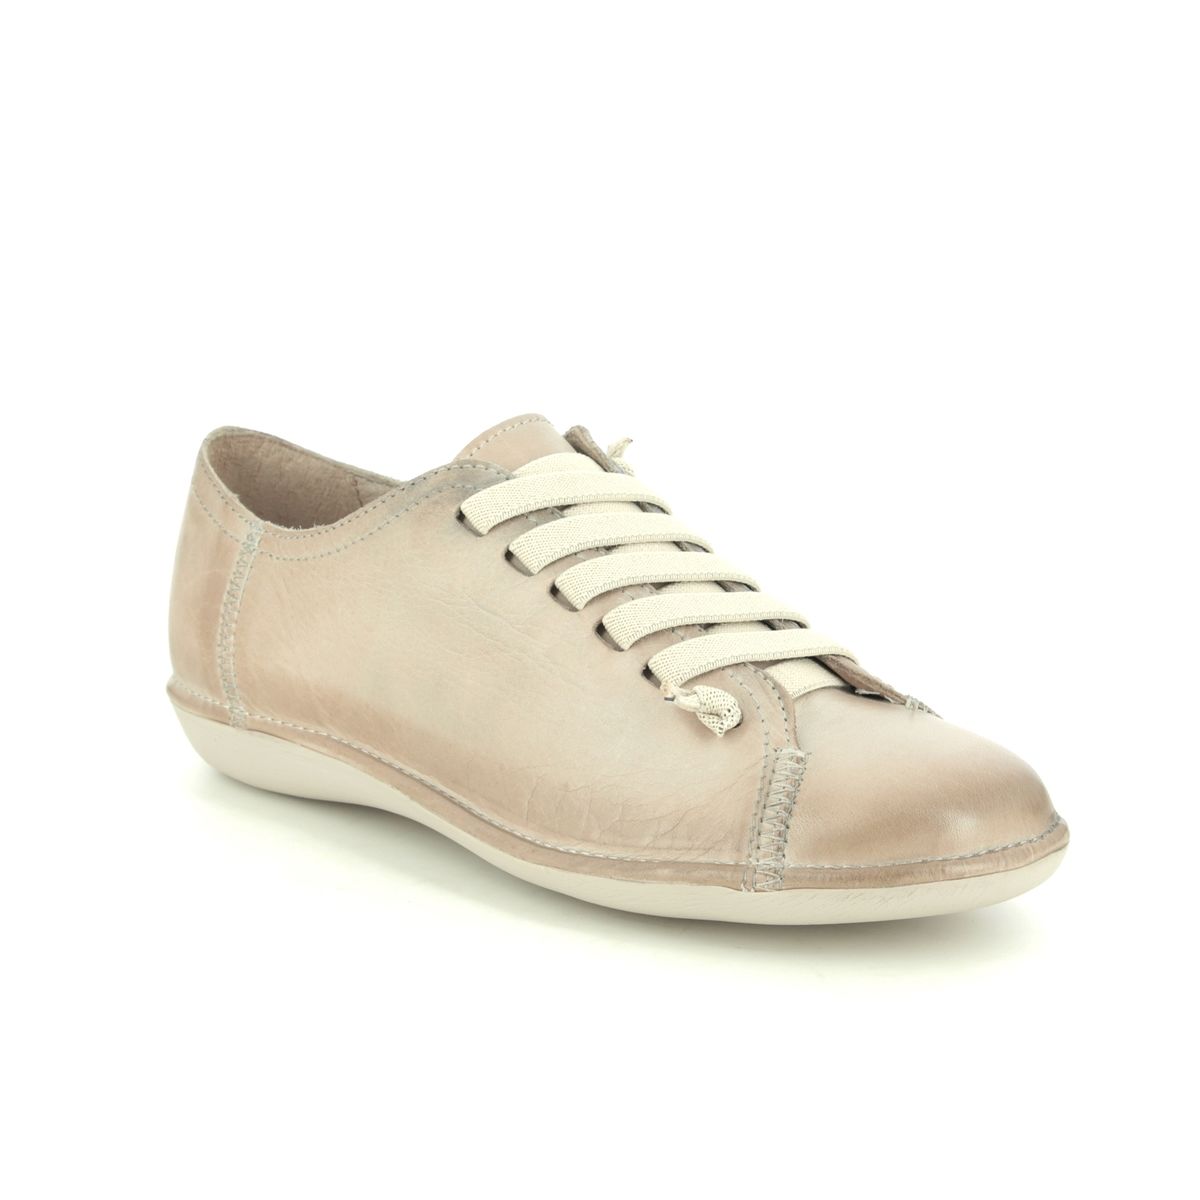 Creator Notelite Light taupe Womens lacing shoes IB12476-50 in a Plain Leather in Size 38